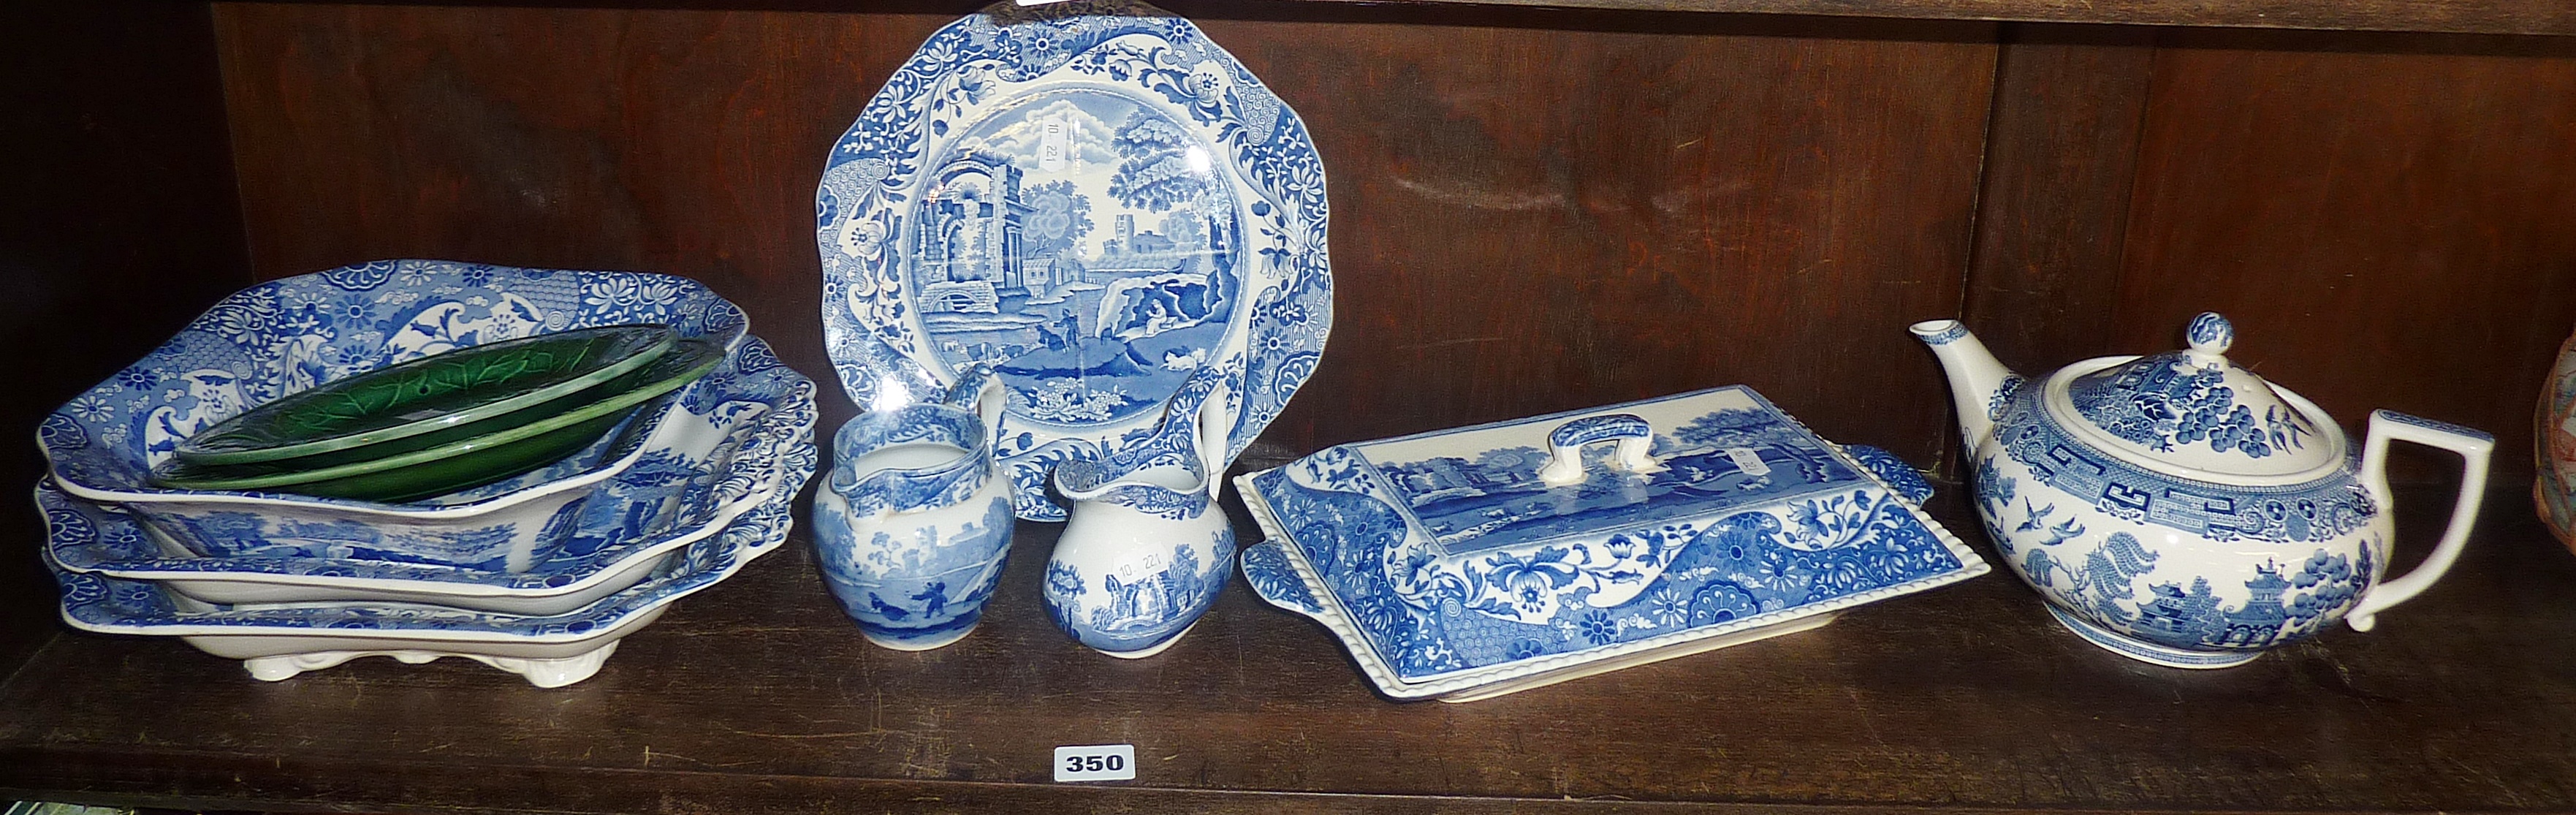 Blue and white Copeland Spode 'Ruins' pattern lidded vegetable dish, plates, jugs, Wedgwood 'Willow'